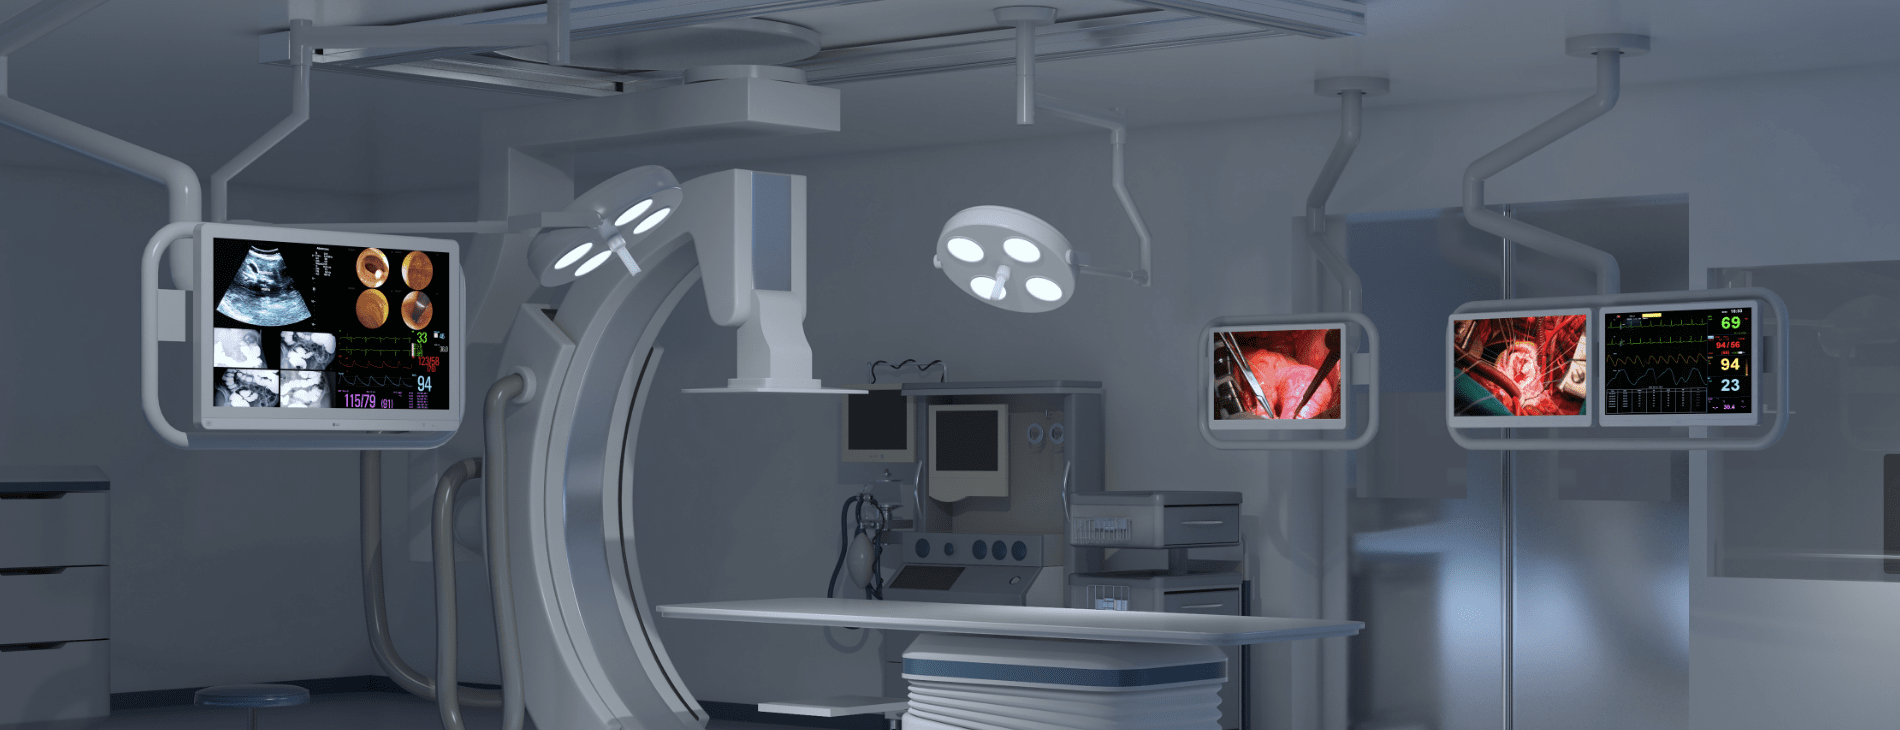 Operating room equipped with LG surgical monitors for real-time visualization and precision during surgical procedures.